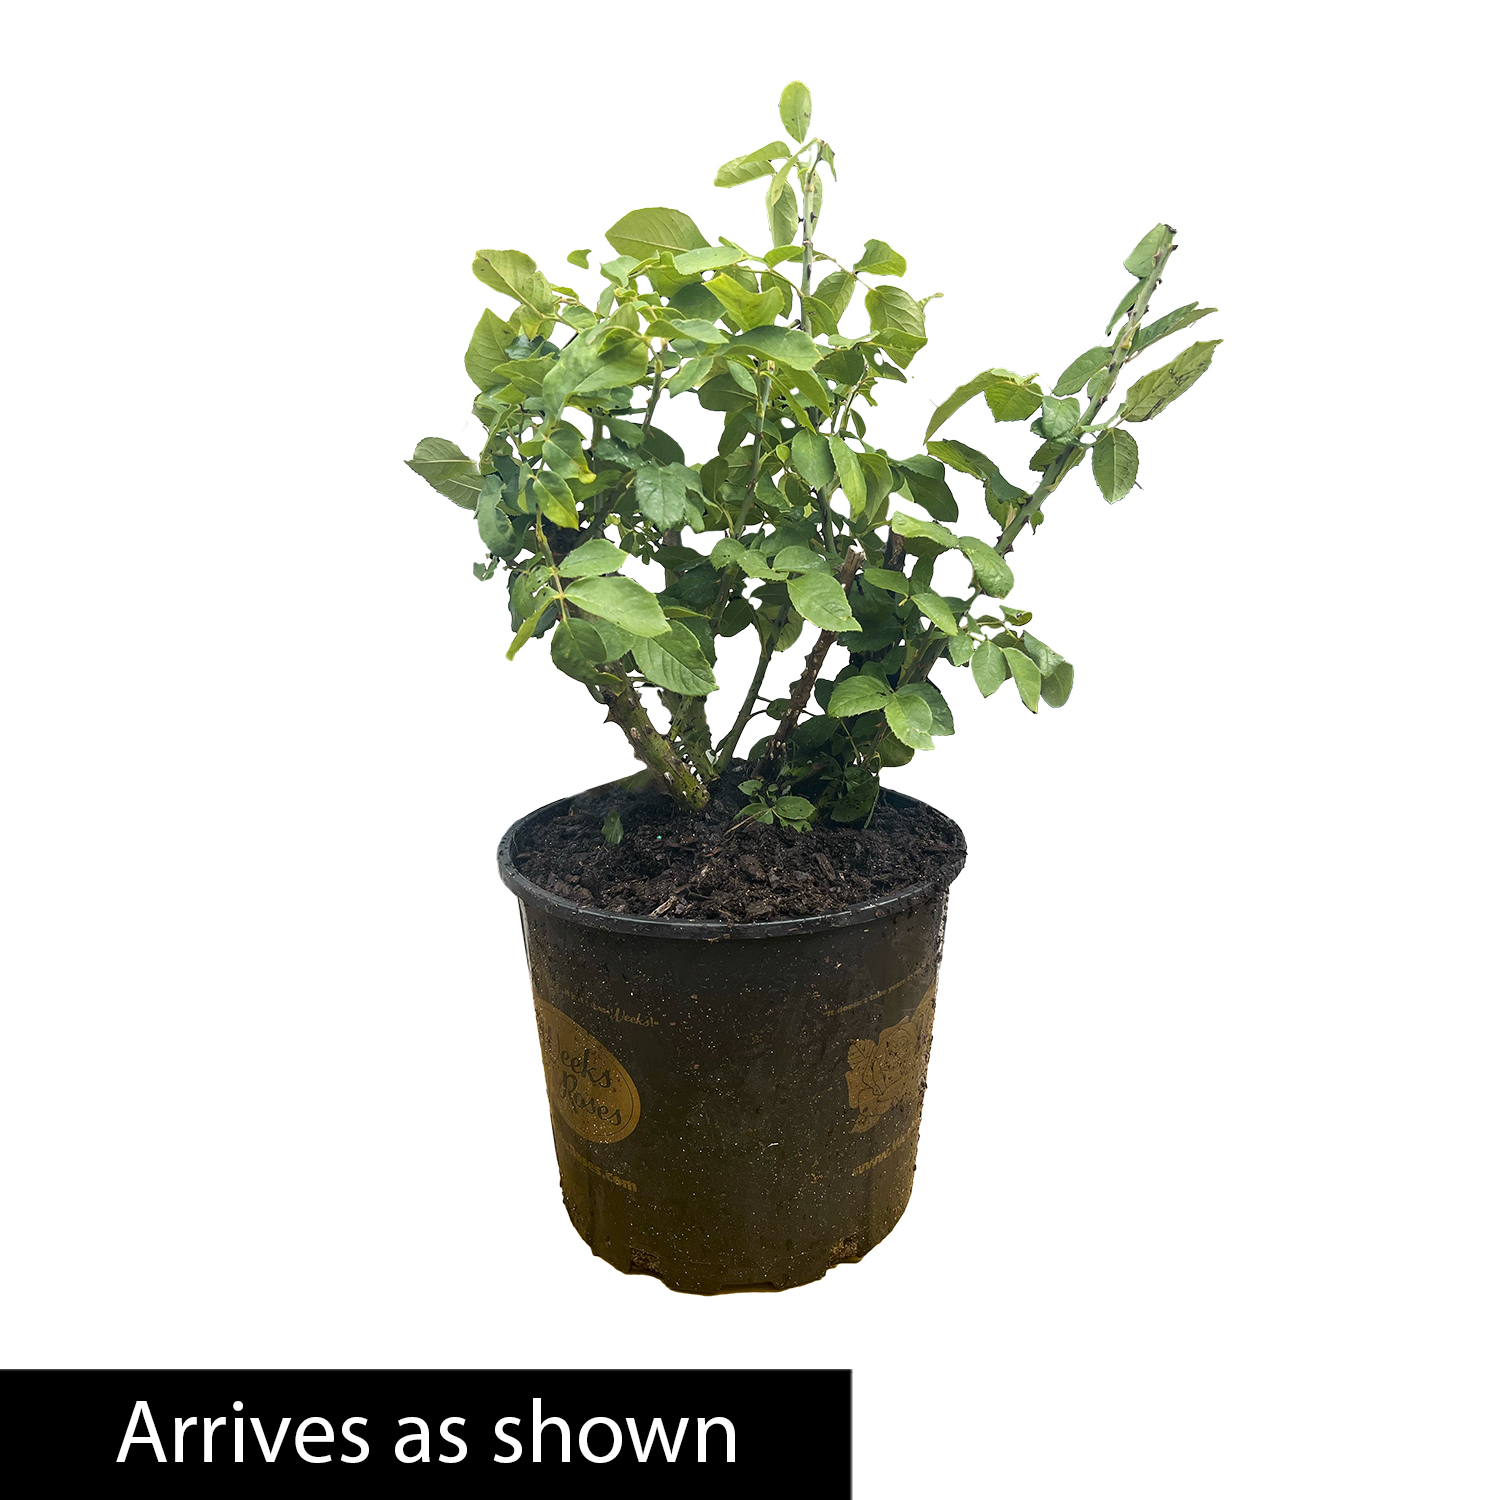 Rock and Roll Grandiflora Rose, 3 Gallon Potted Potted Flowering Plant (1-Pack) - image 2 of 2